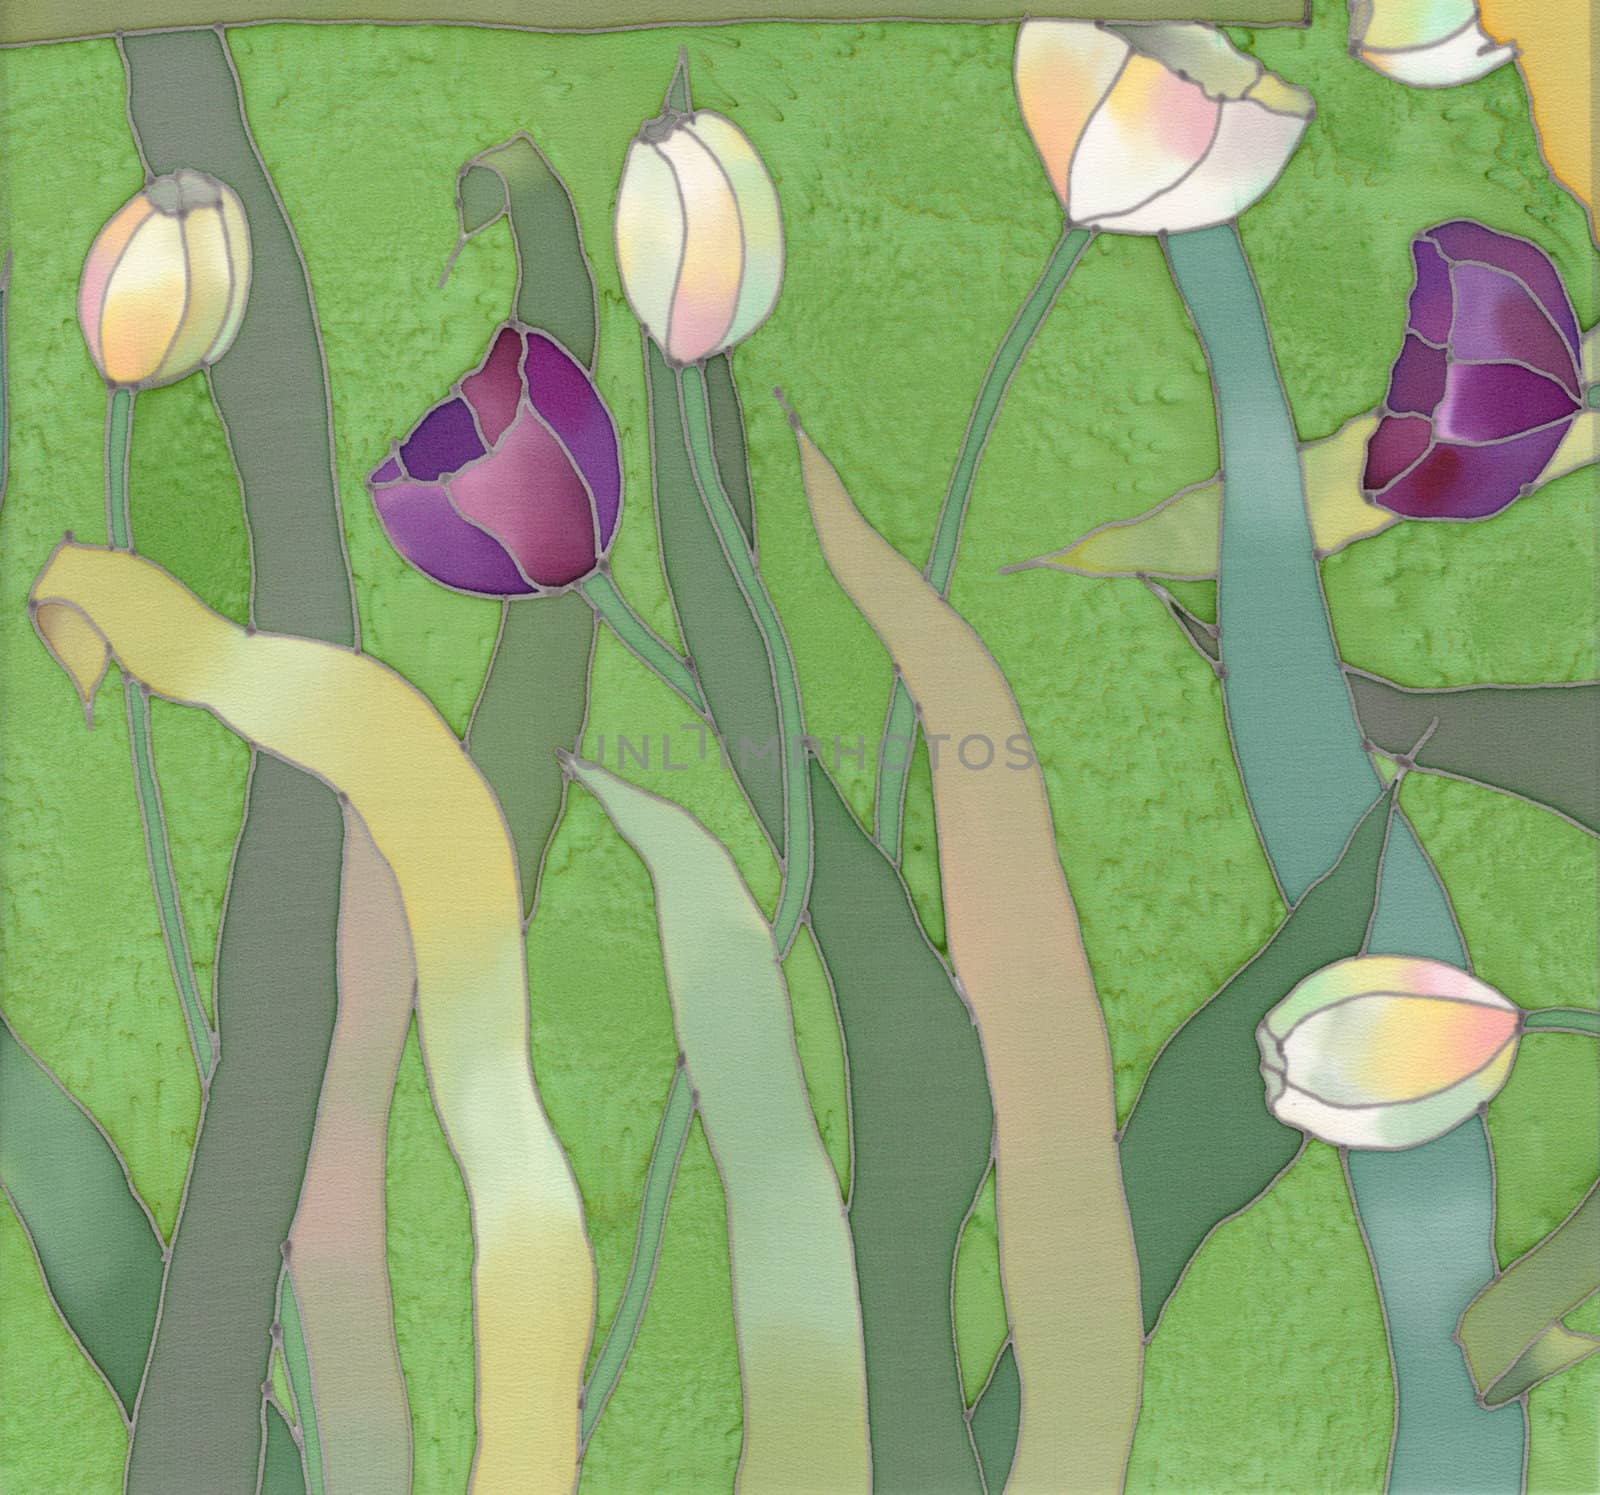 Image of my artwork with a tulips on green background